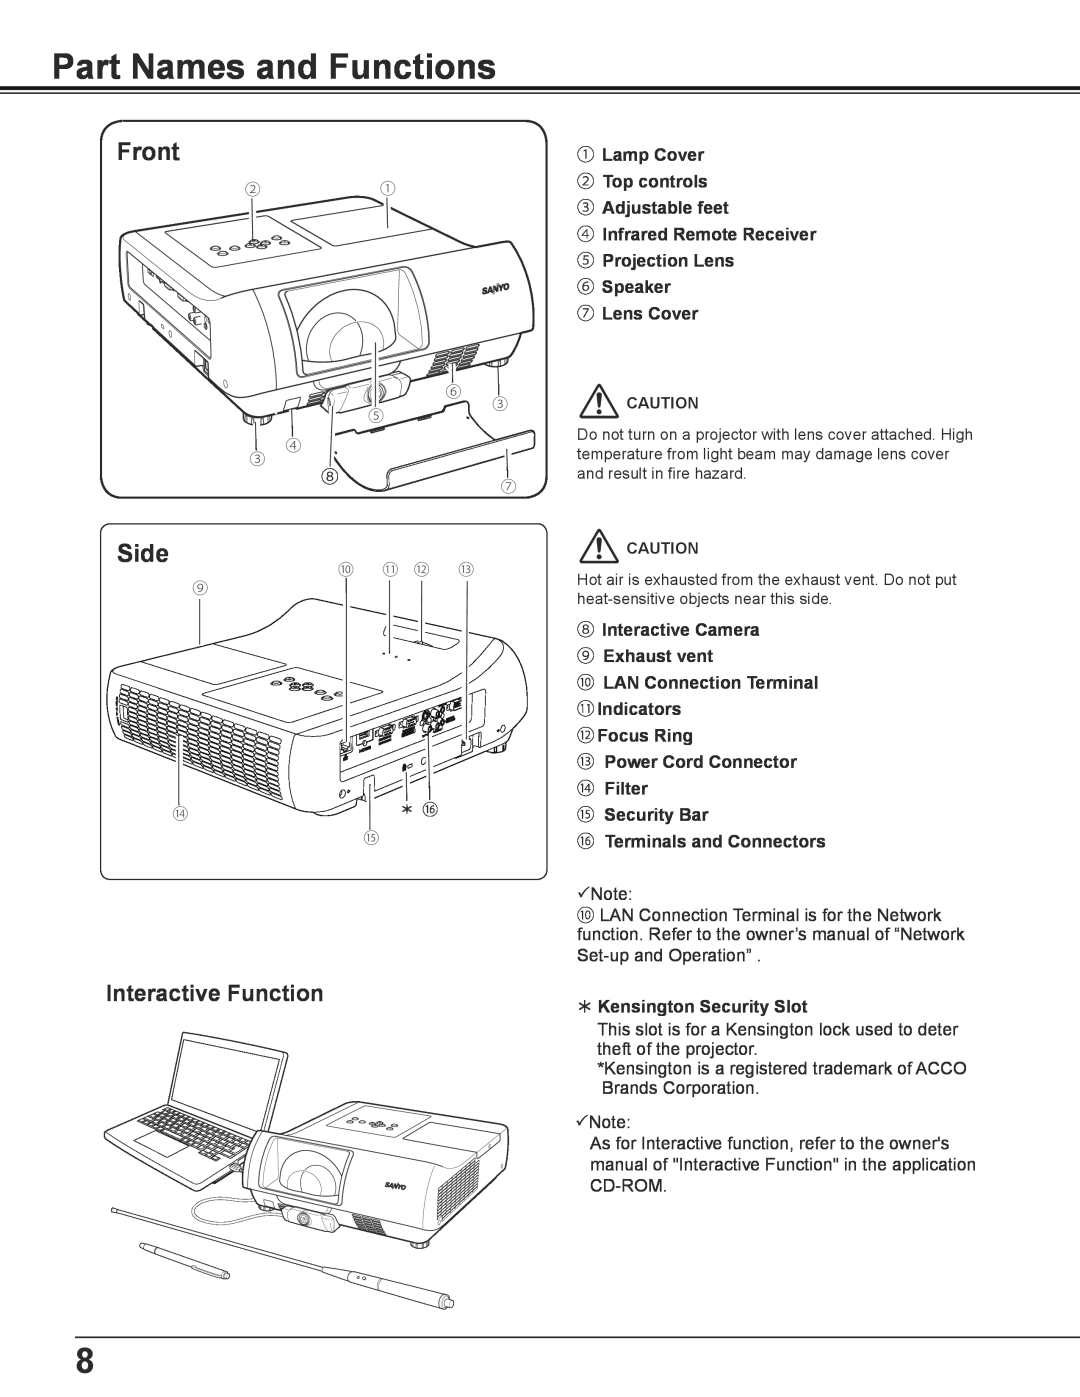 Sanyo PLC-WL2503A Part Names and Functions, Front, Side, Interactive Function, ⑮ Security Bar ⑯ Terminals and Connectors 